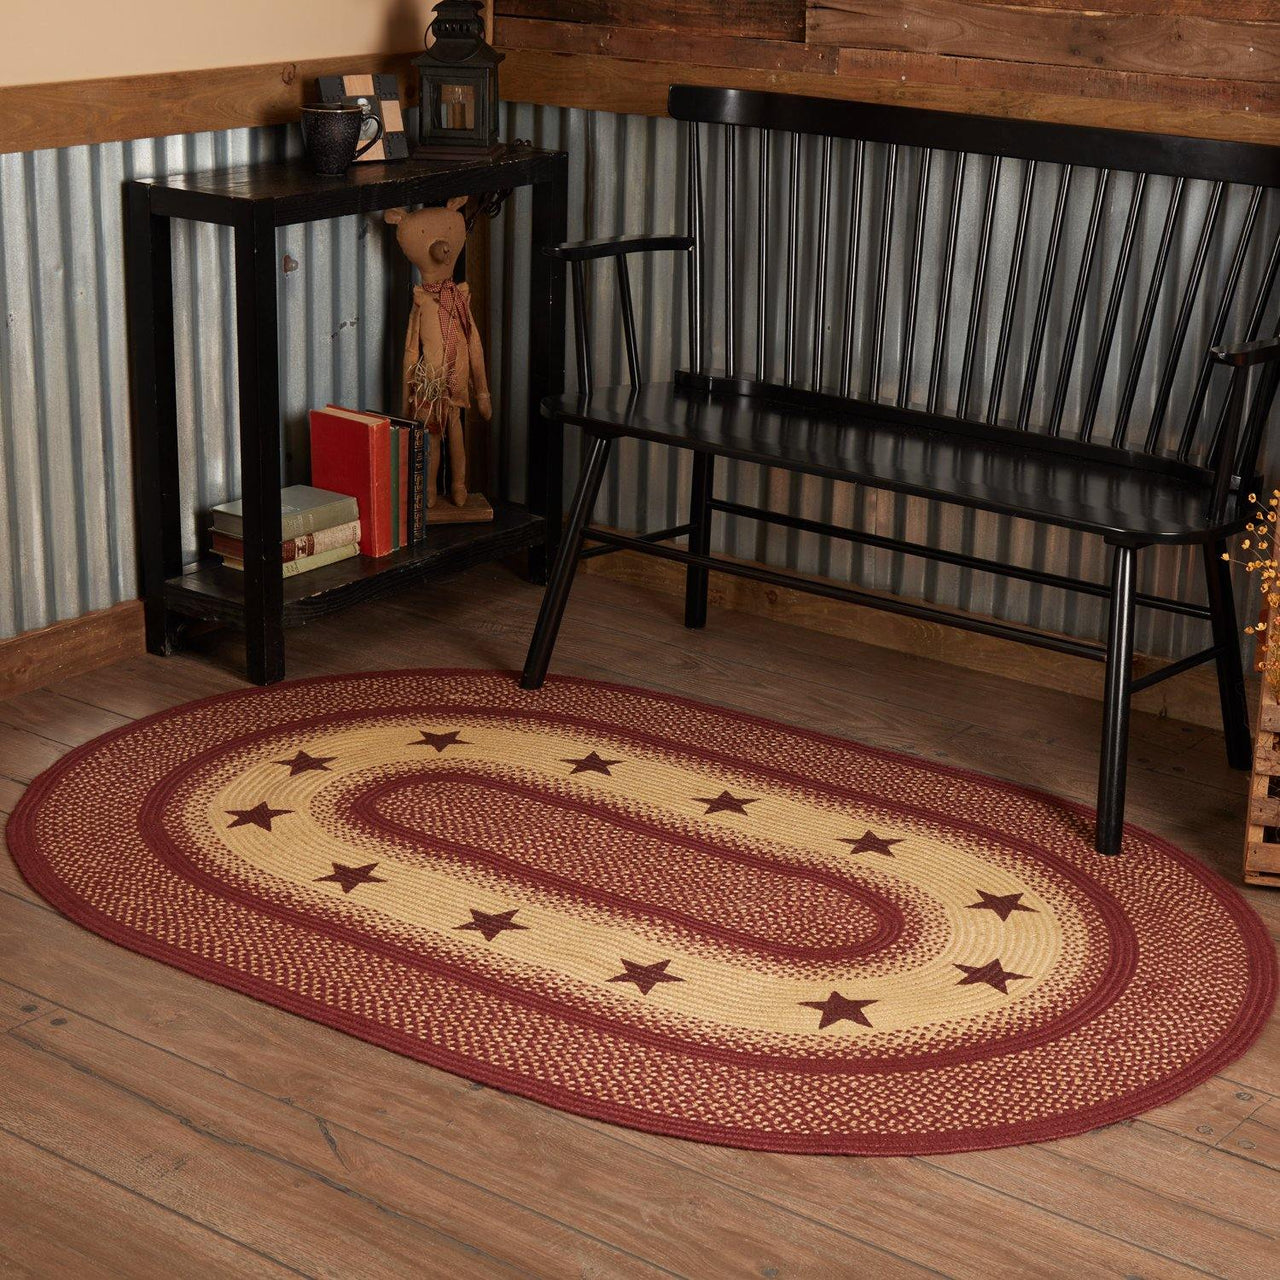 Burgundy Red Primitive Jute Braided Rug Oval Stencil Stars 4'x6' with Rug Pad VHC Brands - The Fox Decor